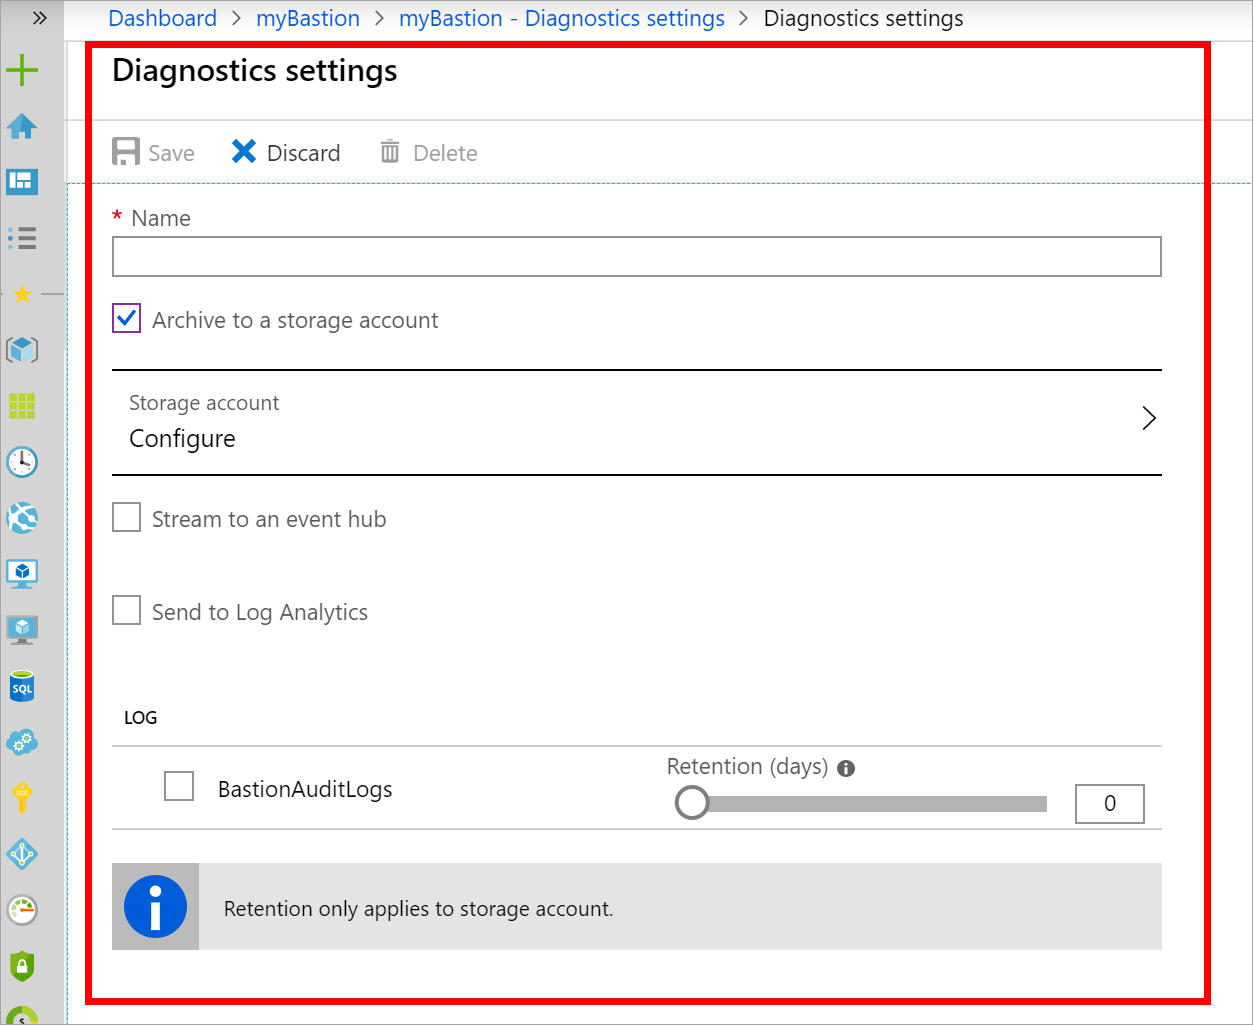 Screenshot of the "Diagnostics settings" page with the section to select a storage location highlighted.